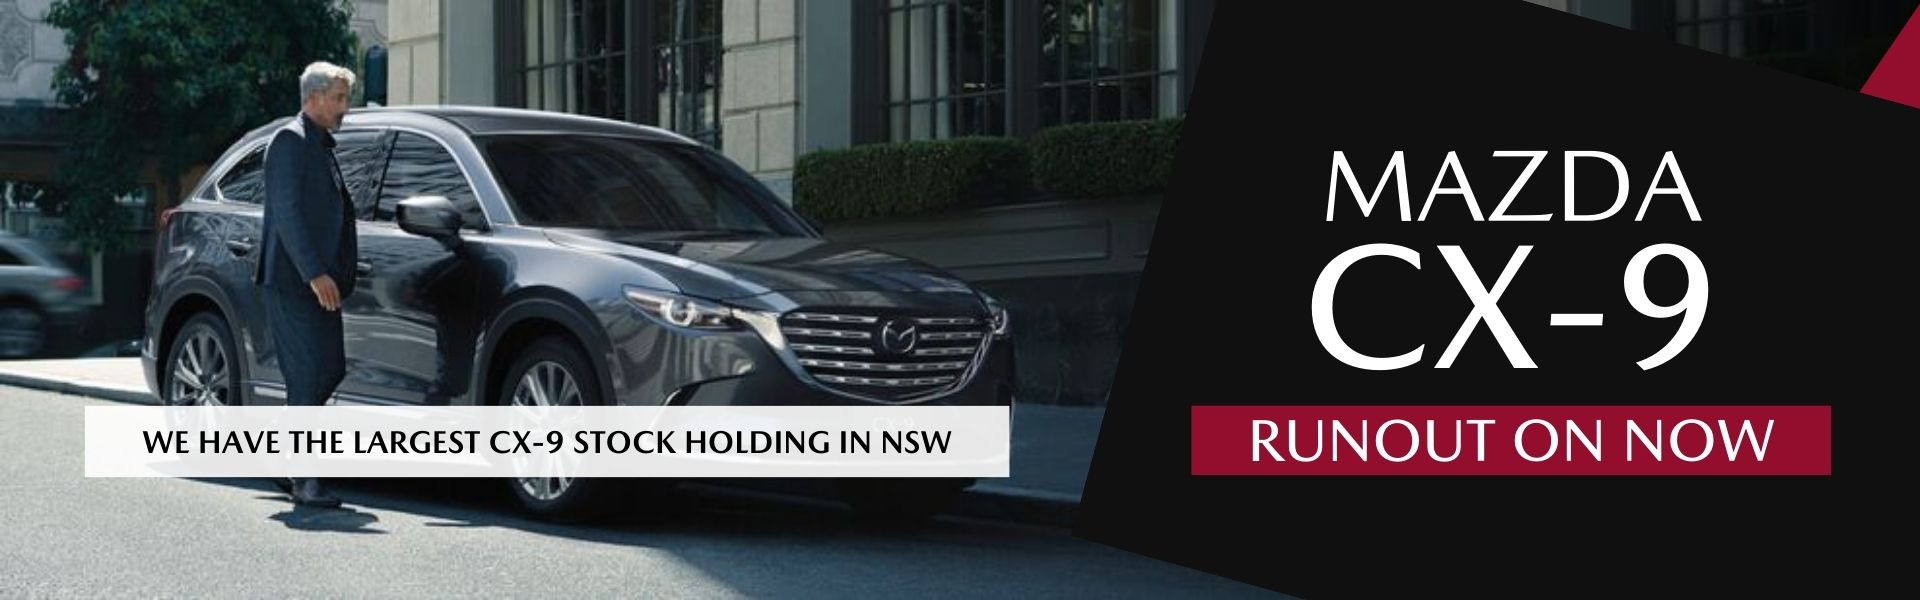 RUNOUT ON NOW - We have the largest CX-9 Stock Holding in NSW.